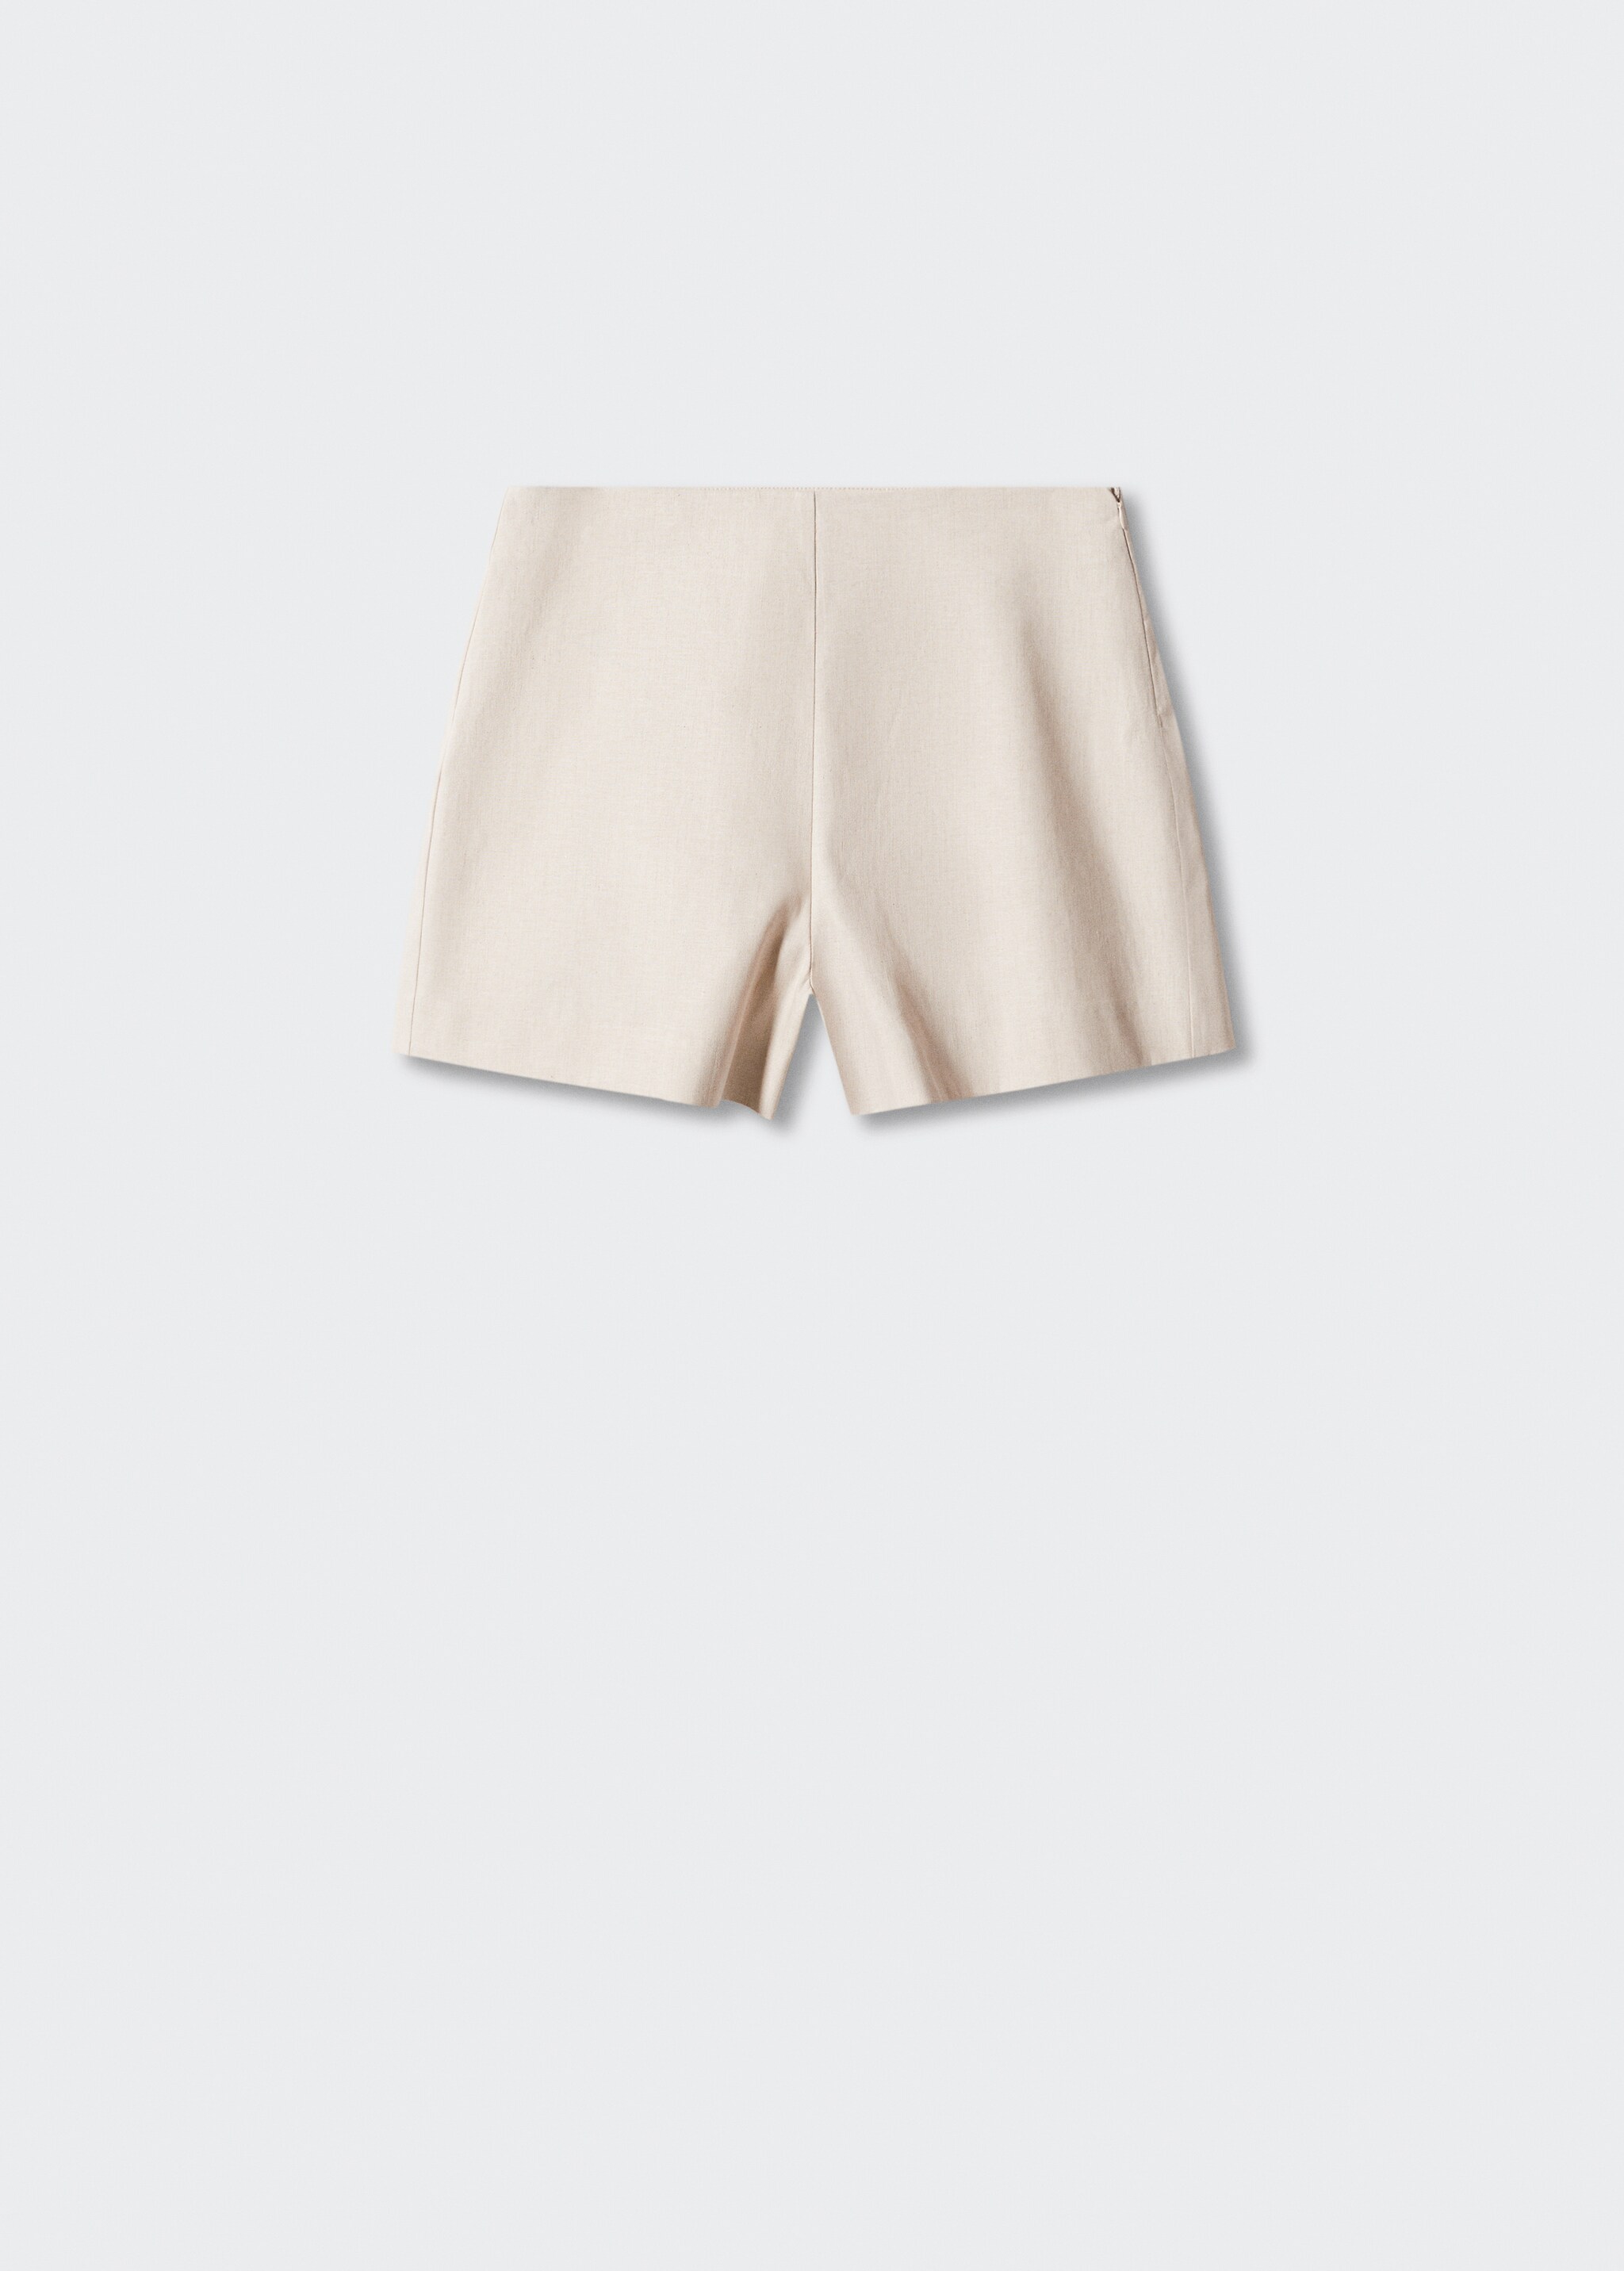 High-waist linen shorts - Article without model